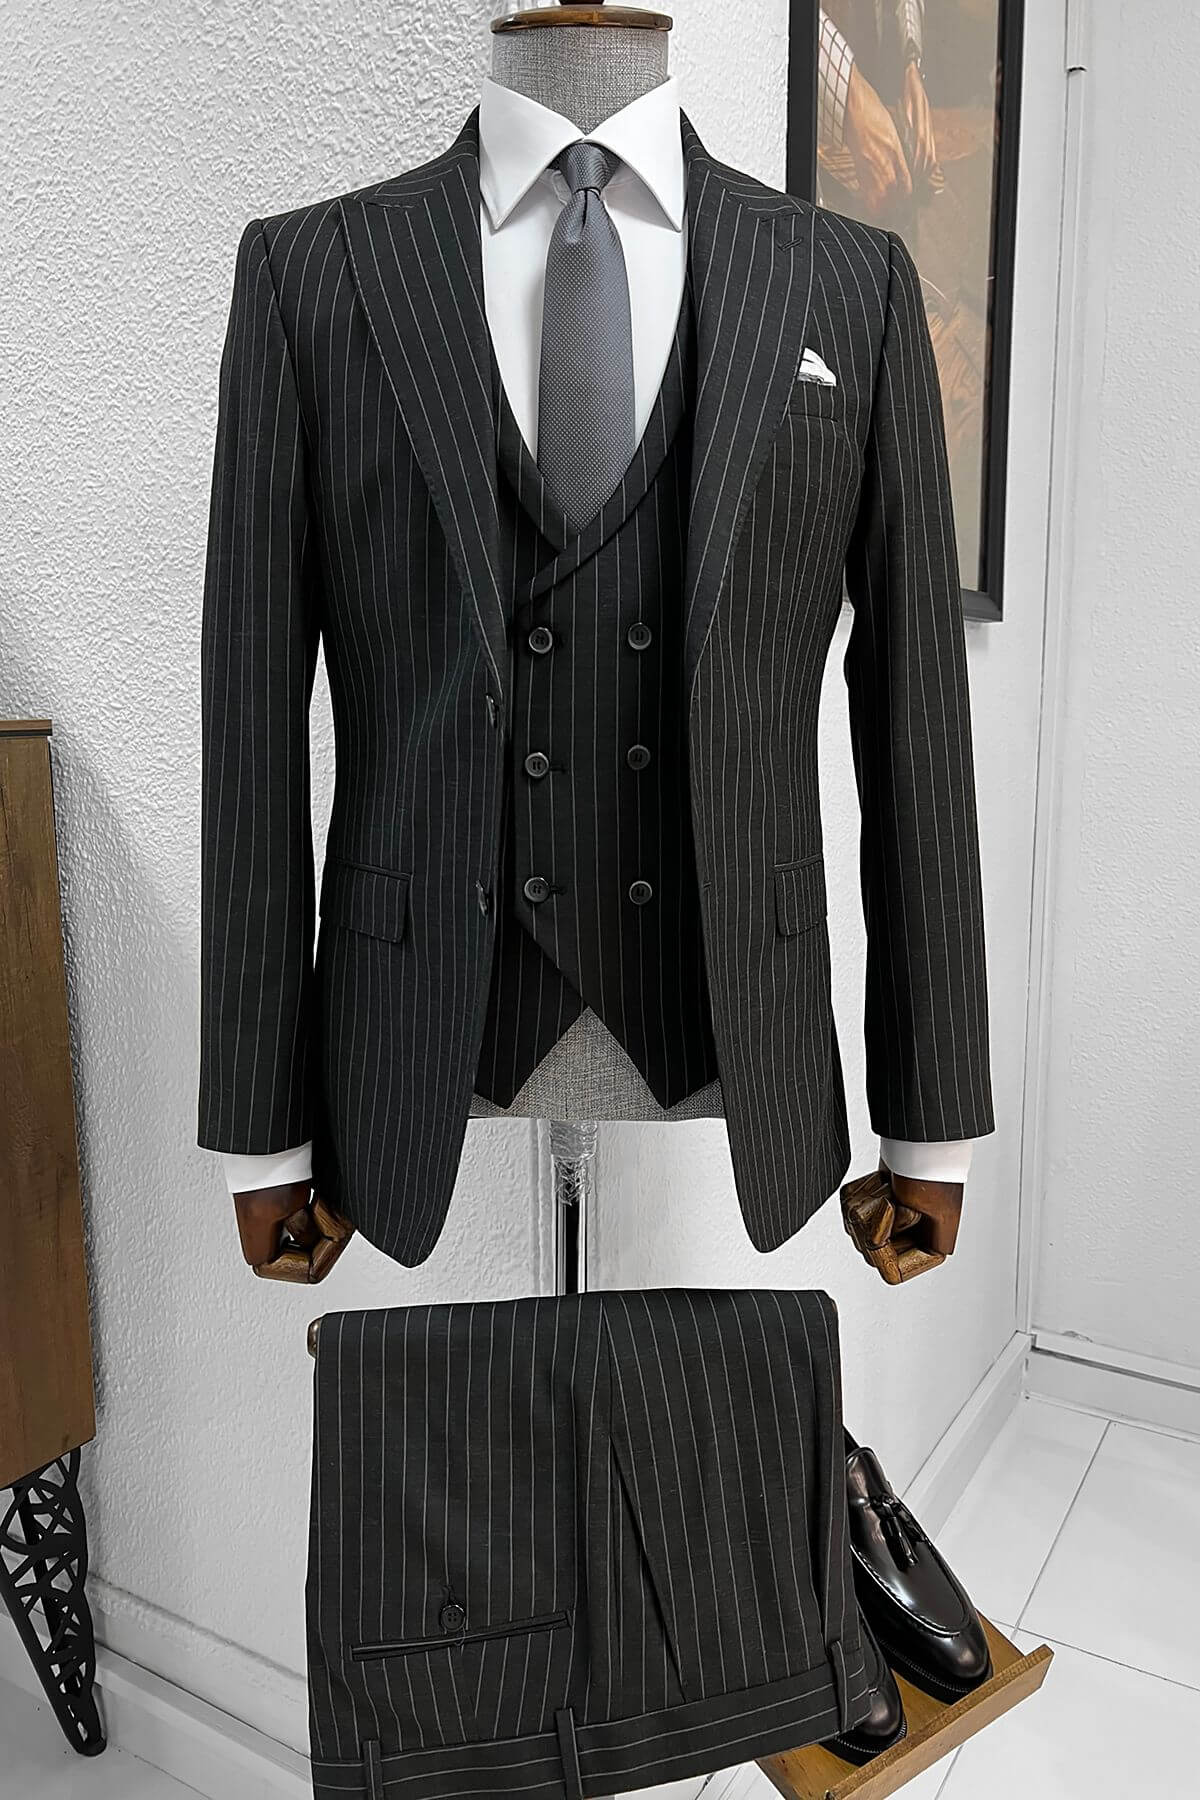 A Striped-Light Black- Suit on display